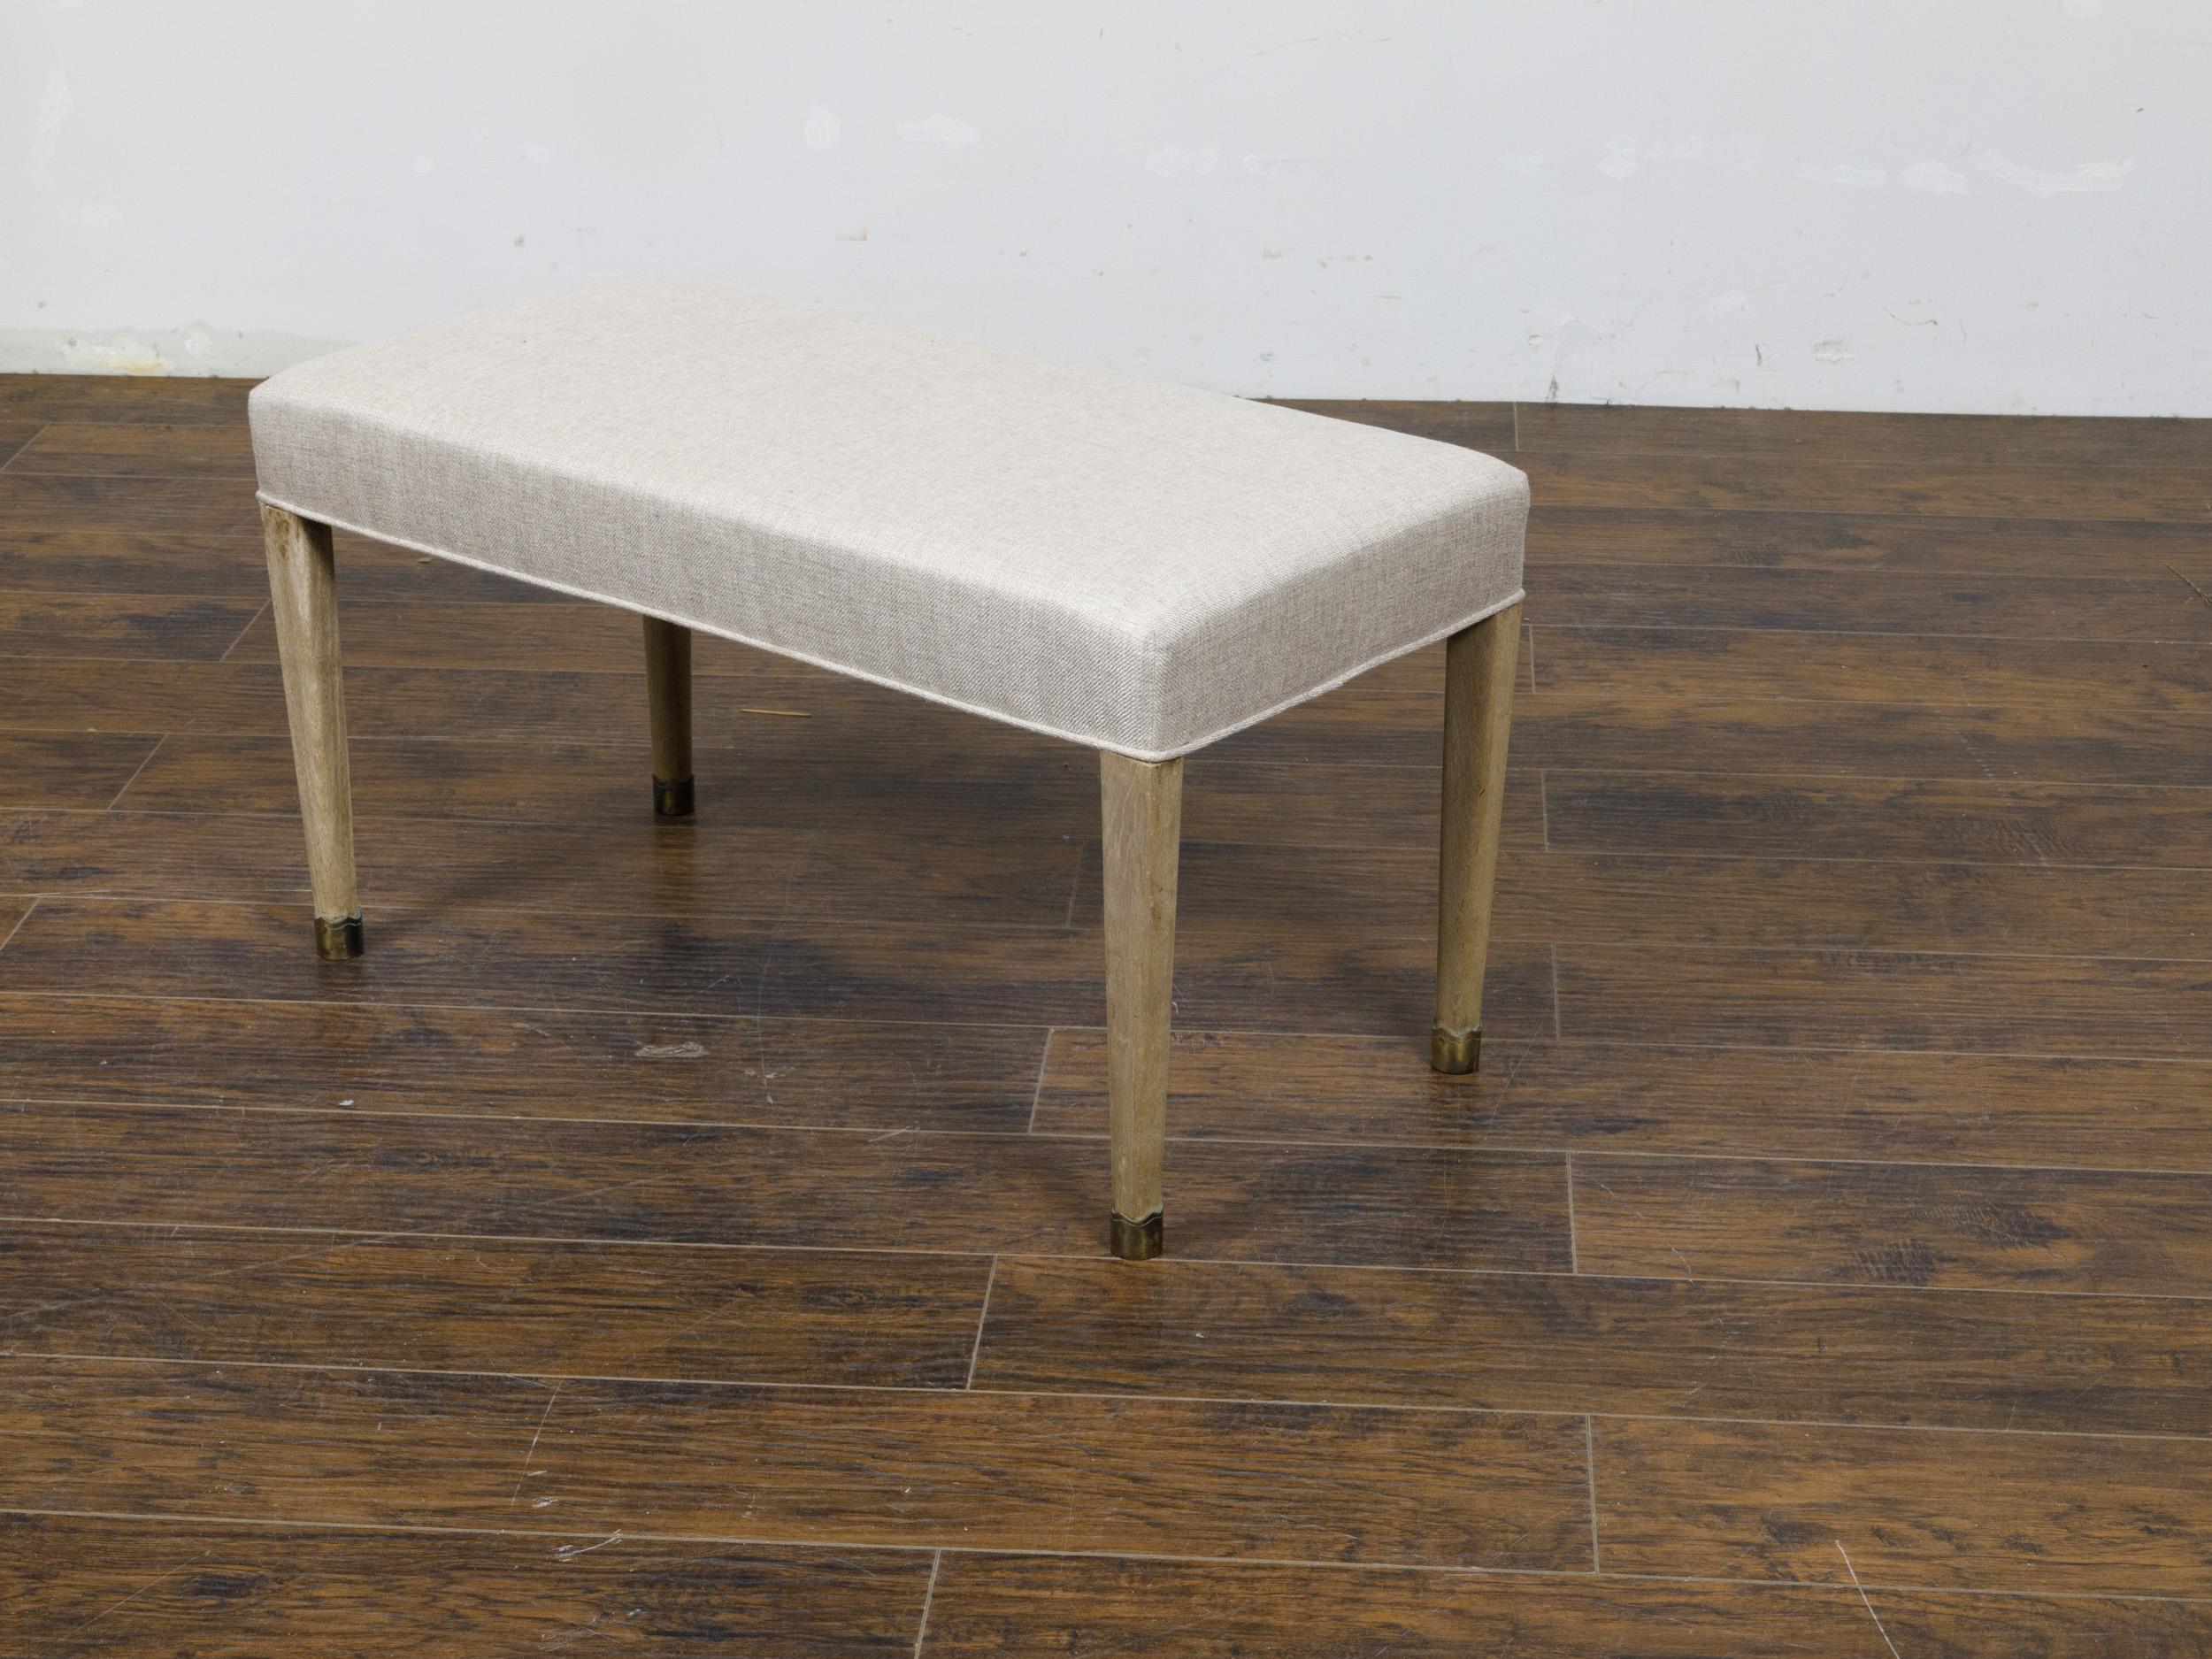 French Art Deco 1930s Bleached Walnut Bench with Brass Feet and Upholstery For Sale 2